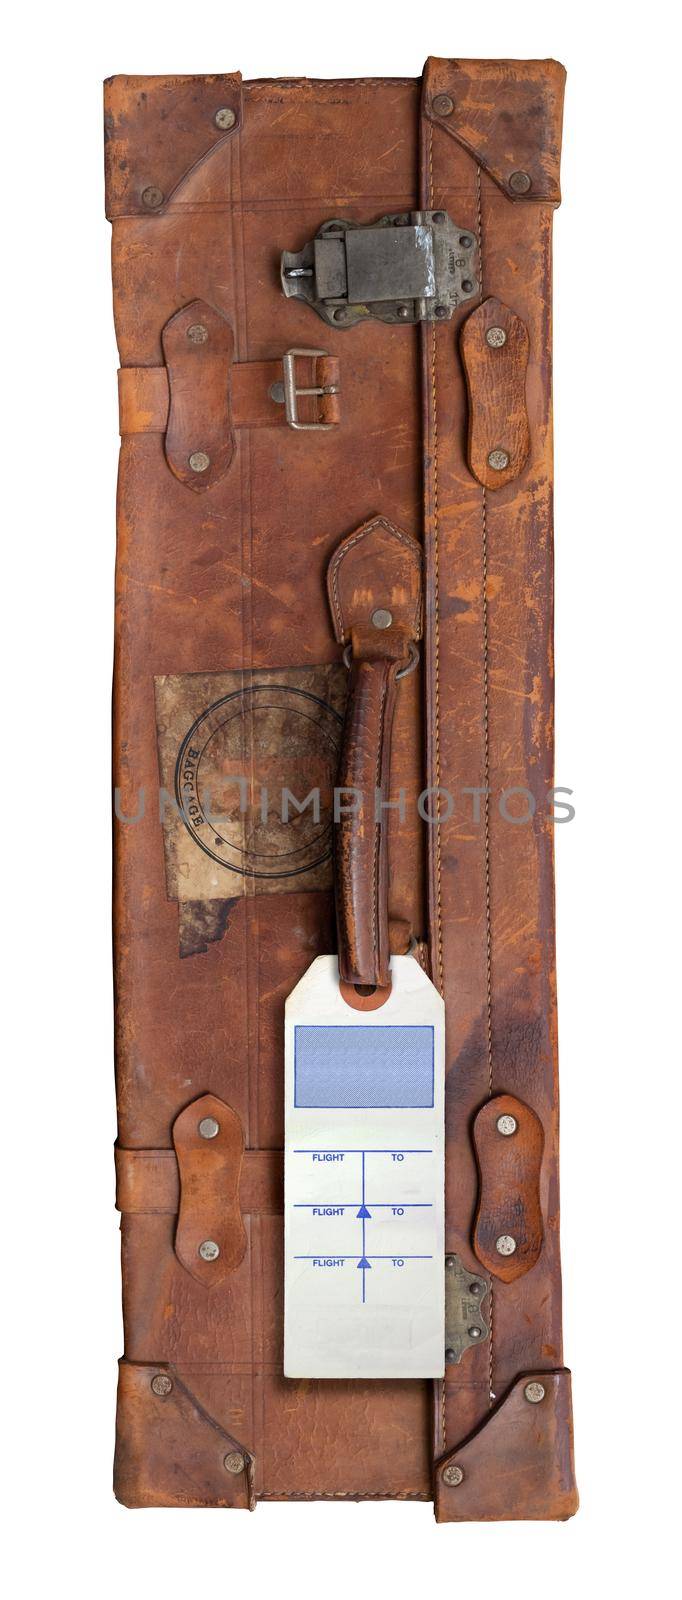 Retro Vintage Old Brown Suitcase With A Blank Luggage Tag Or Label, Isolated On A White Background